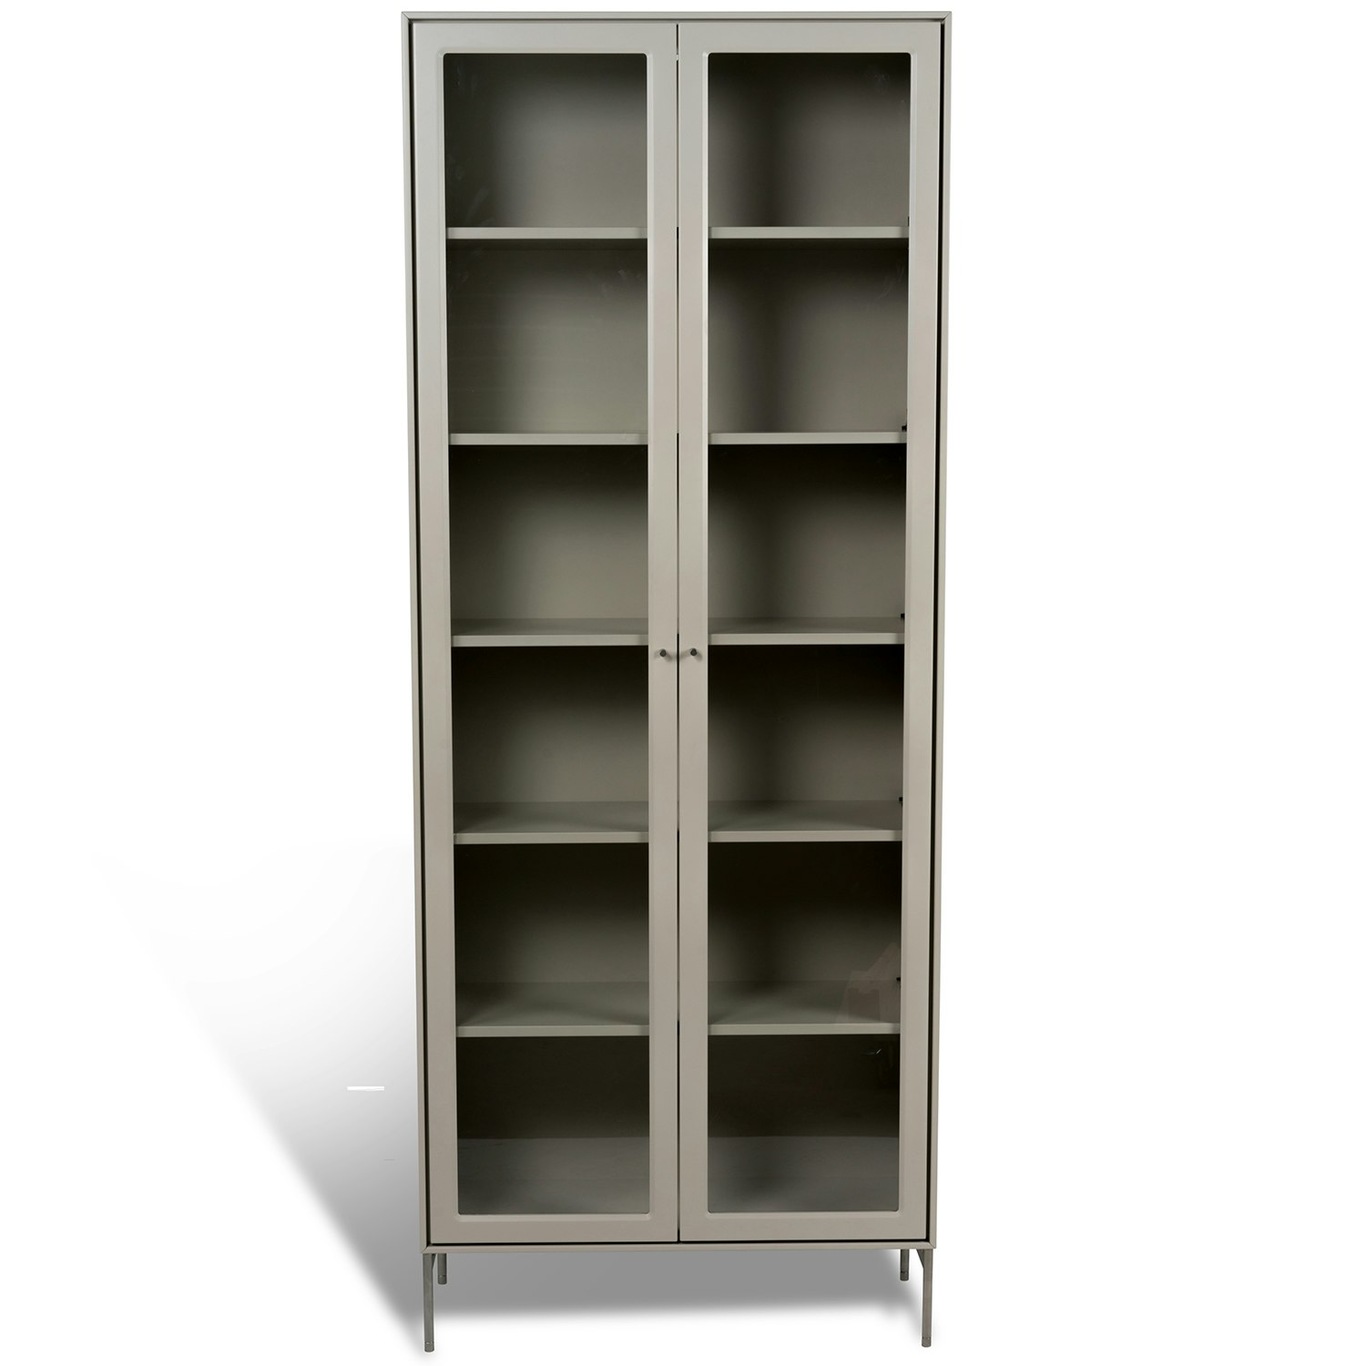 Volt Cabinet With Glass Doors 190 cm, Beige/Stainless Steel